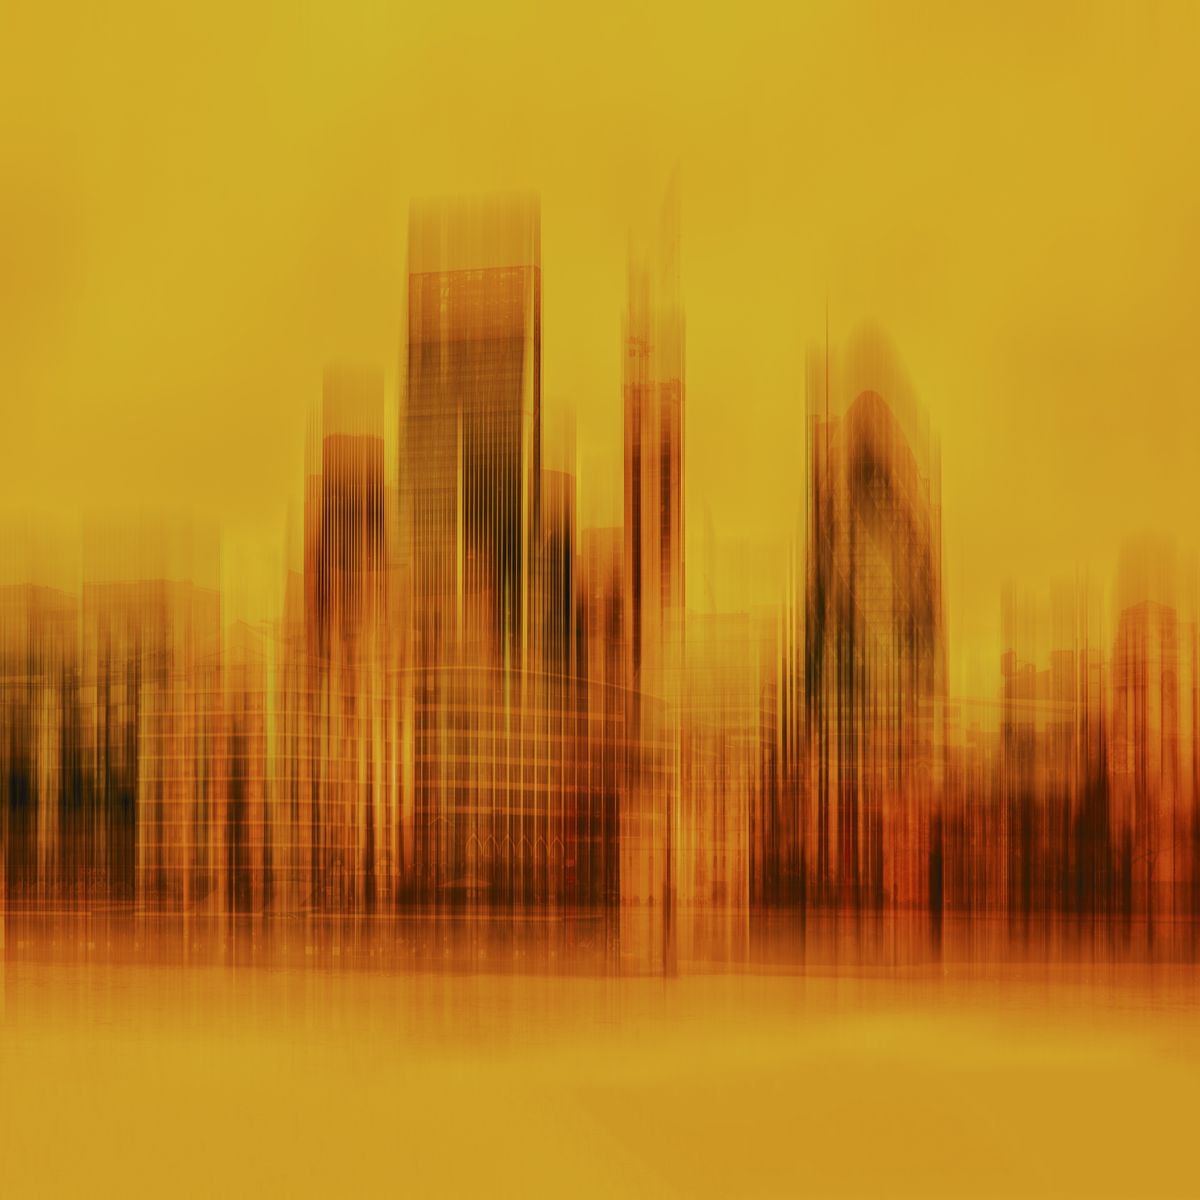 Abstract London: The City by Graham Briggs